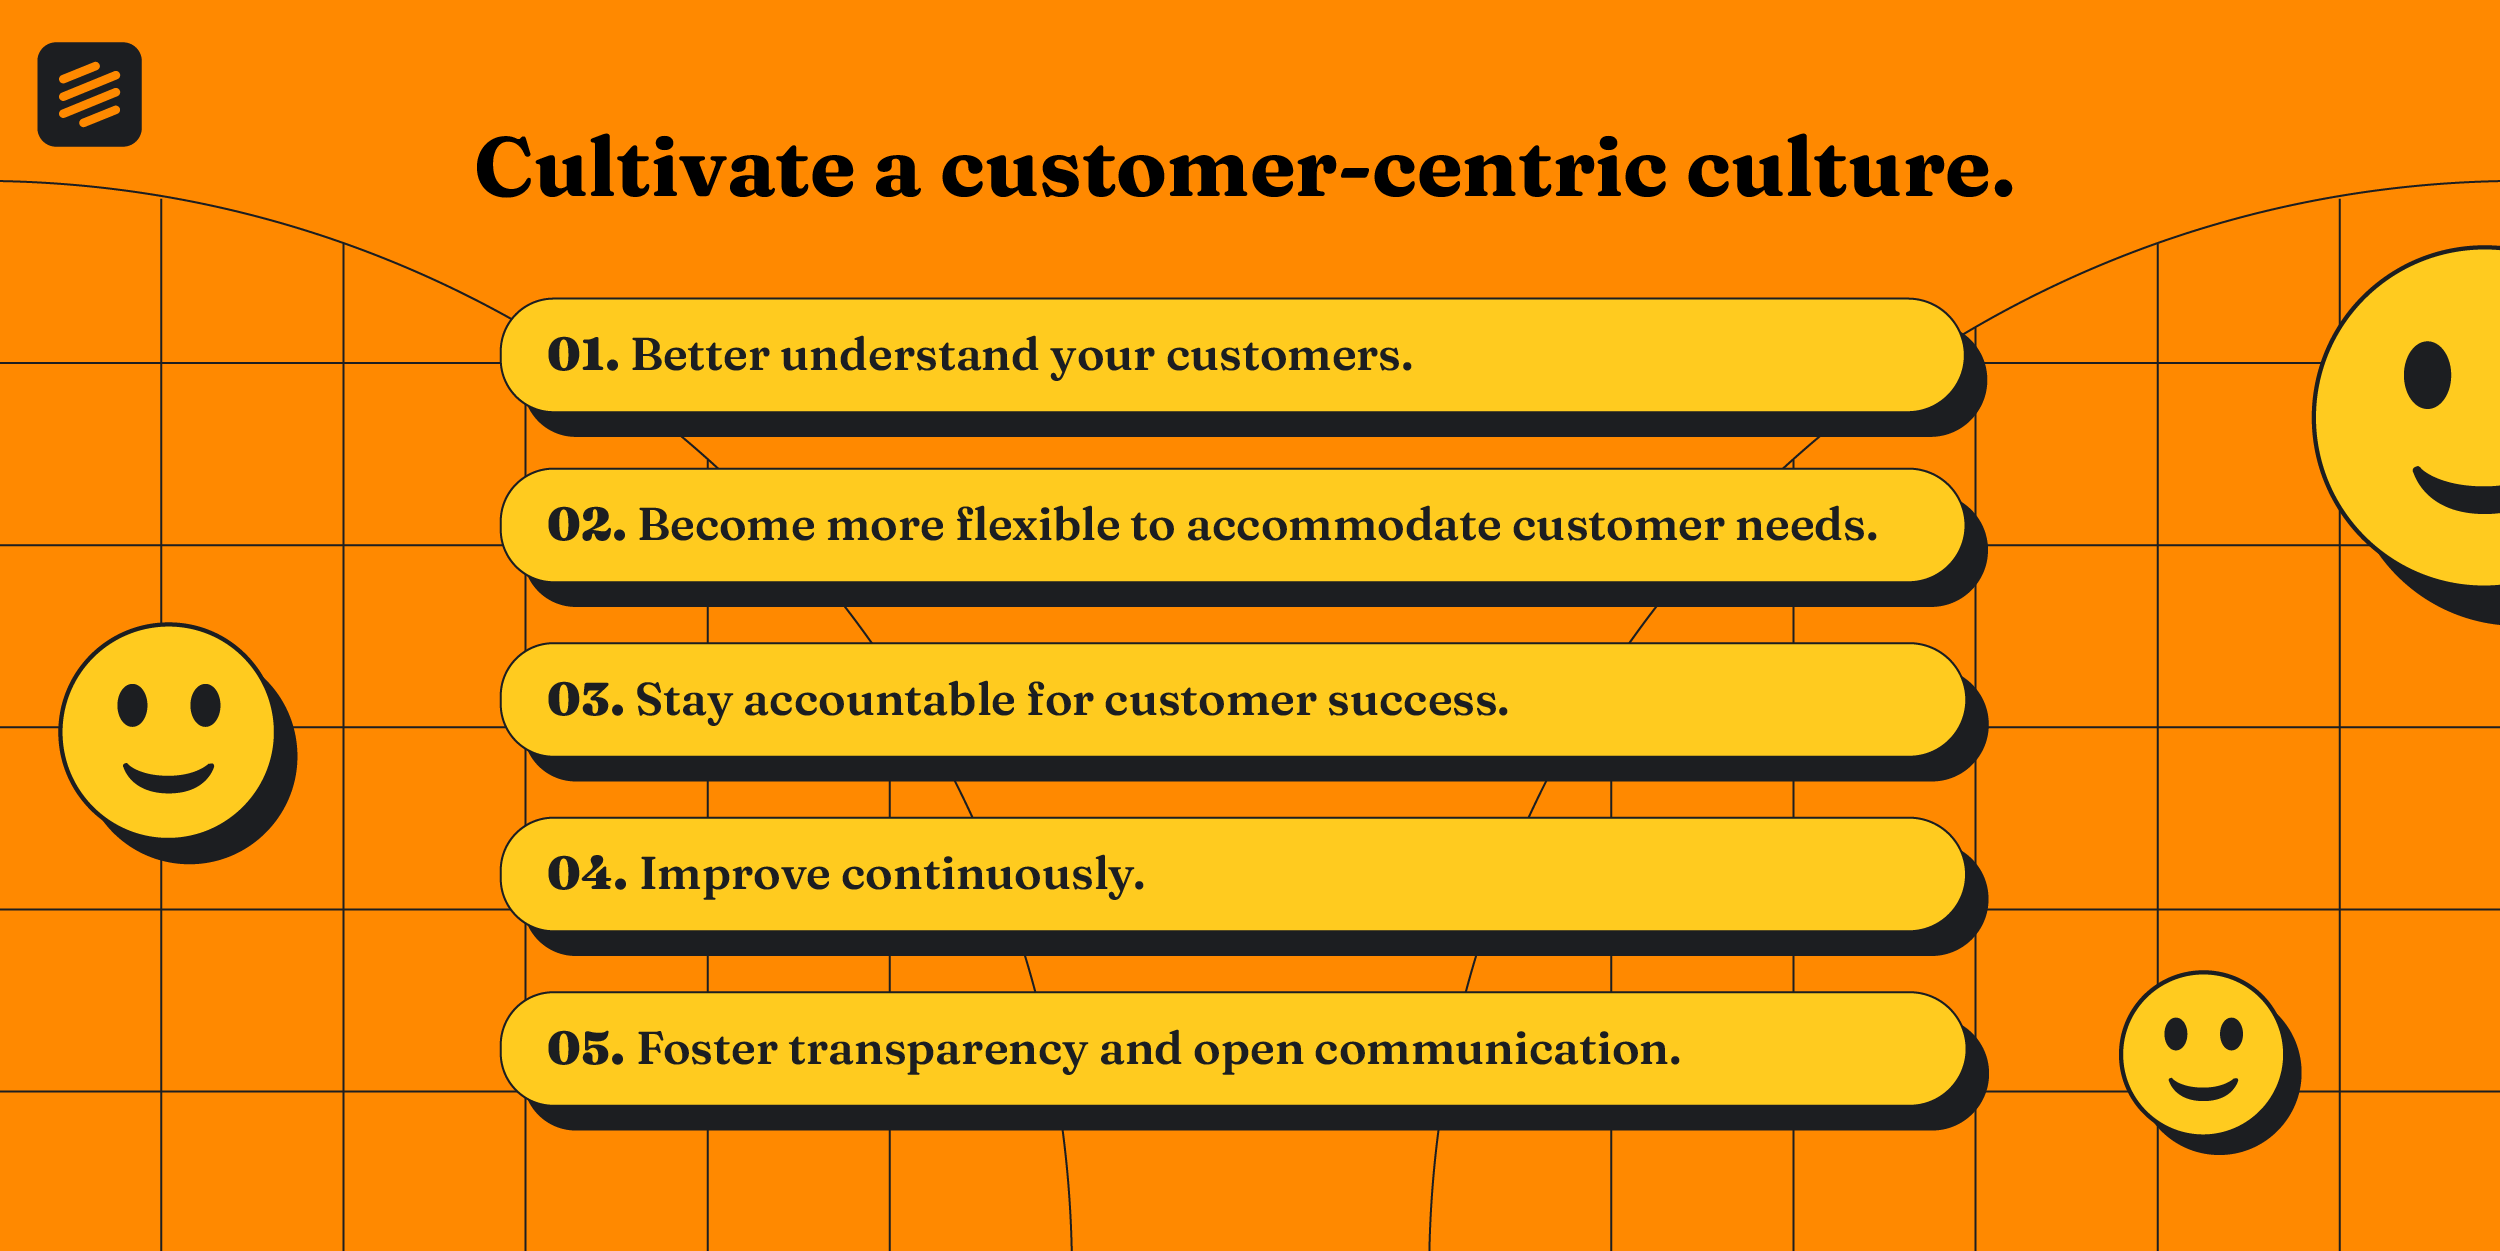 Prioritizing customer feedback cultivates a customer-centric culture at your startup.